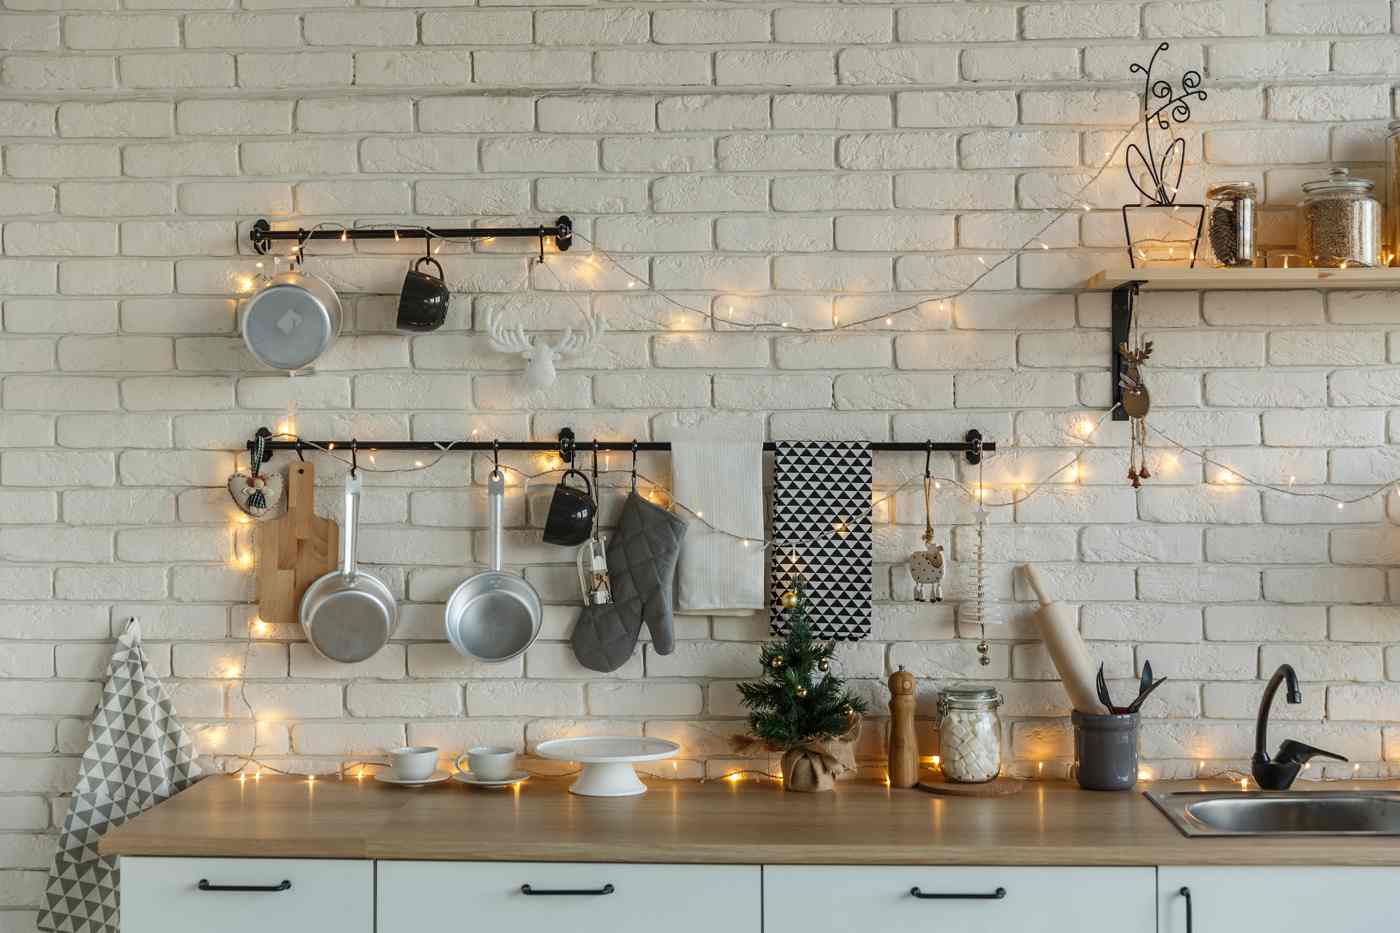     Lamps and Lights in the Kitchen Decorative Lighting Light Chain